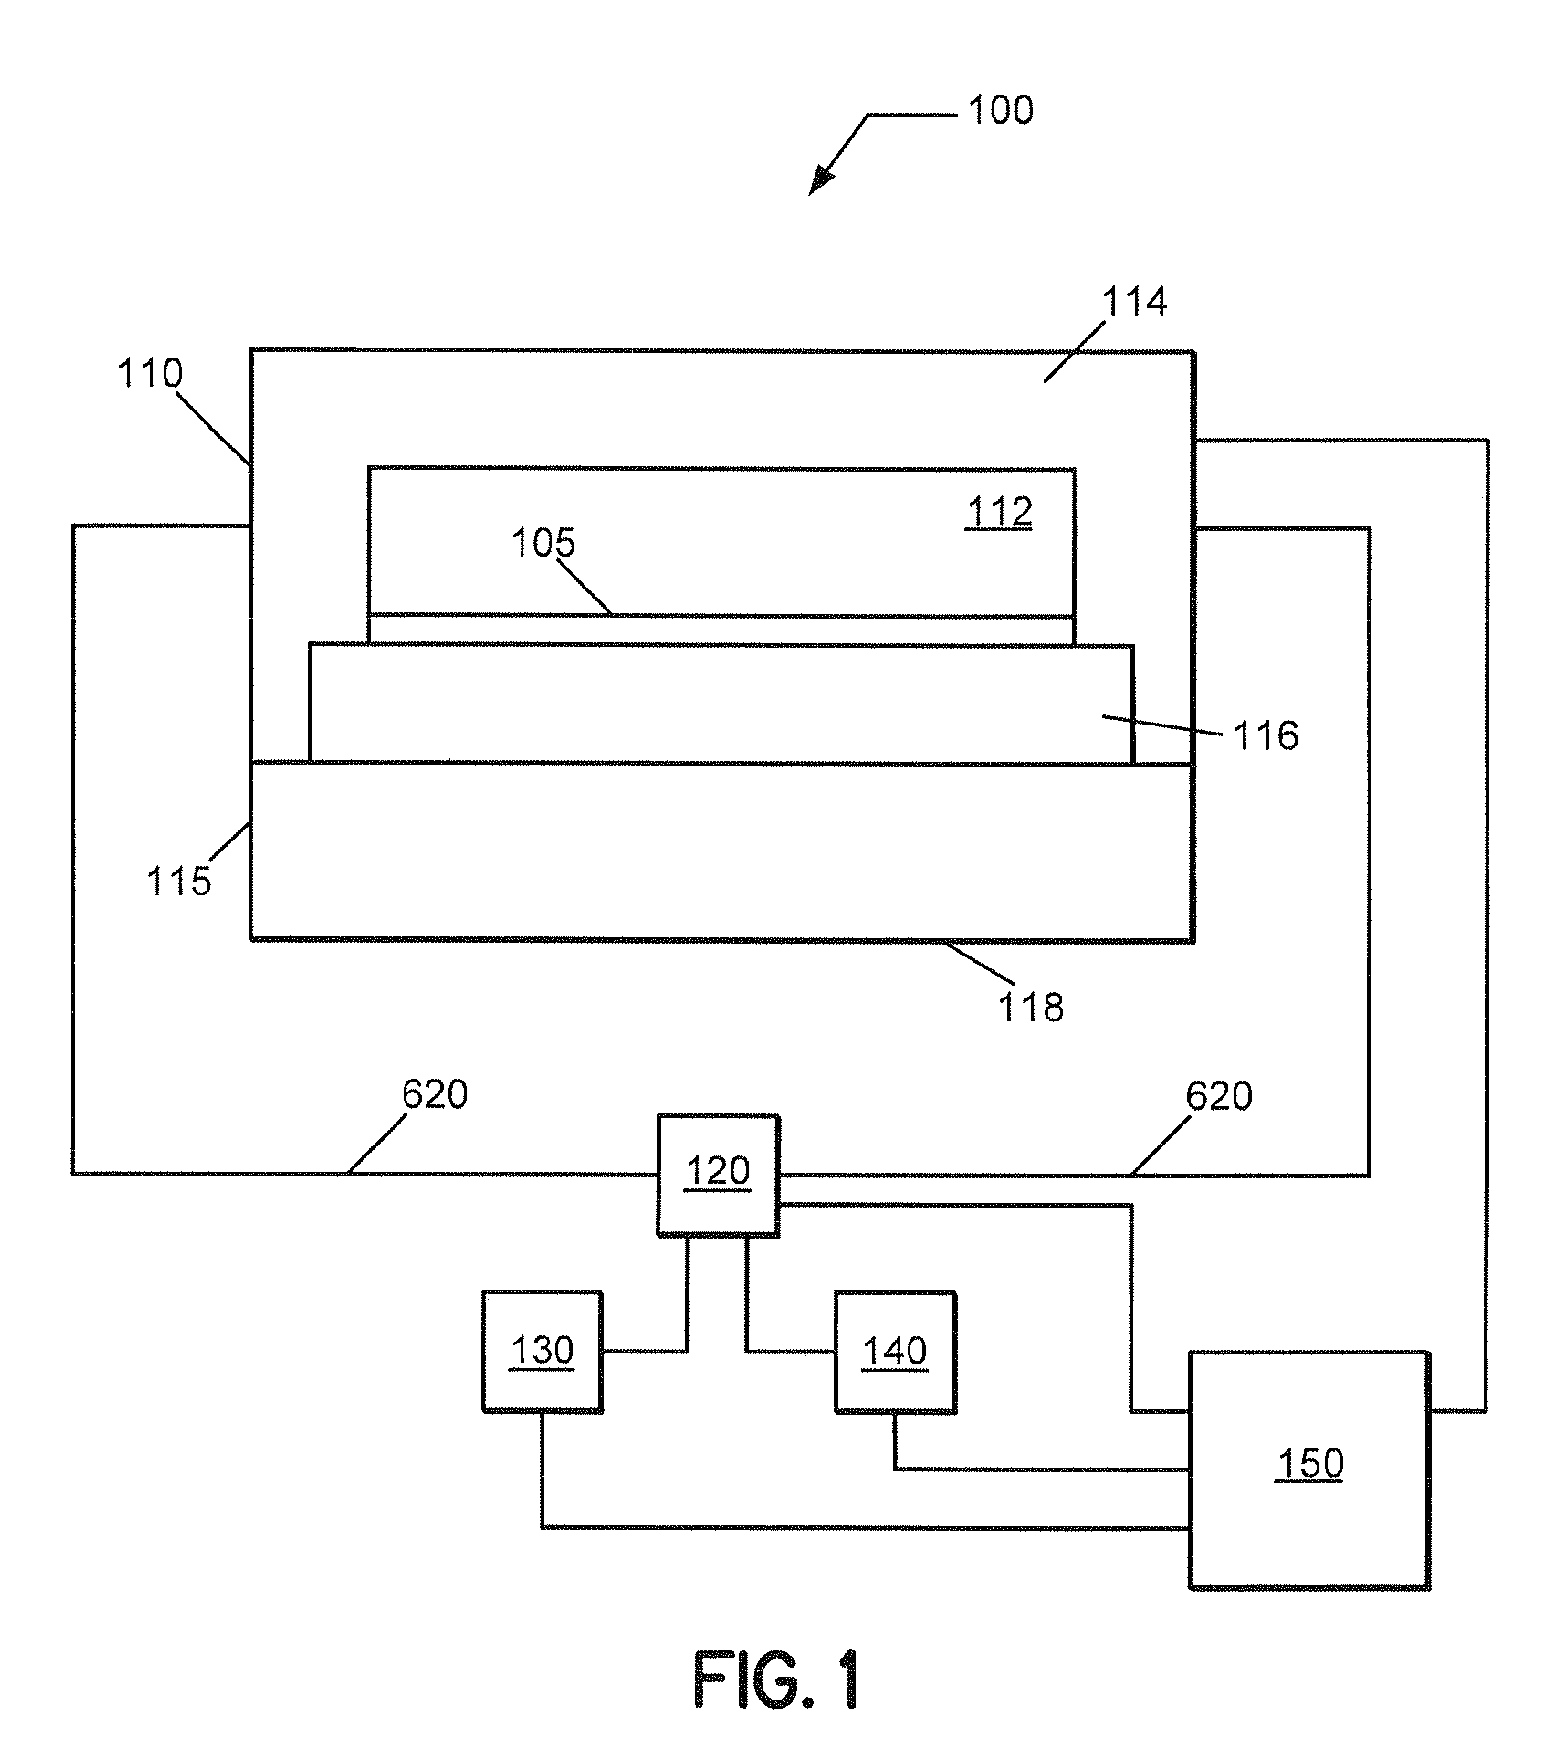 Method and system for treating a substrate with a high pressure fluid using fluorosilicic acid